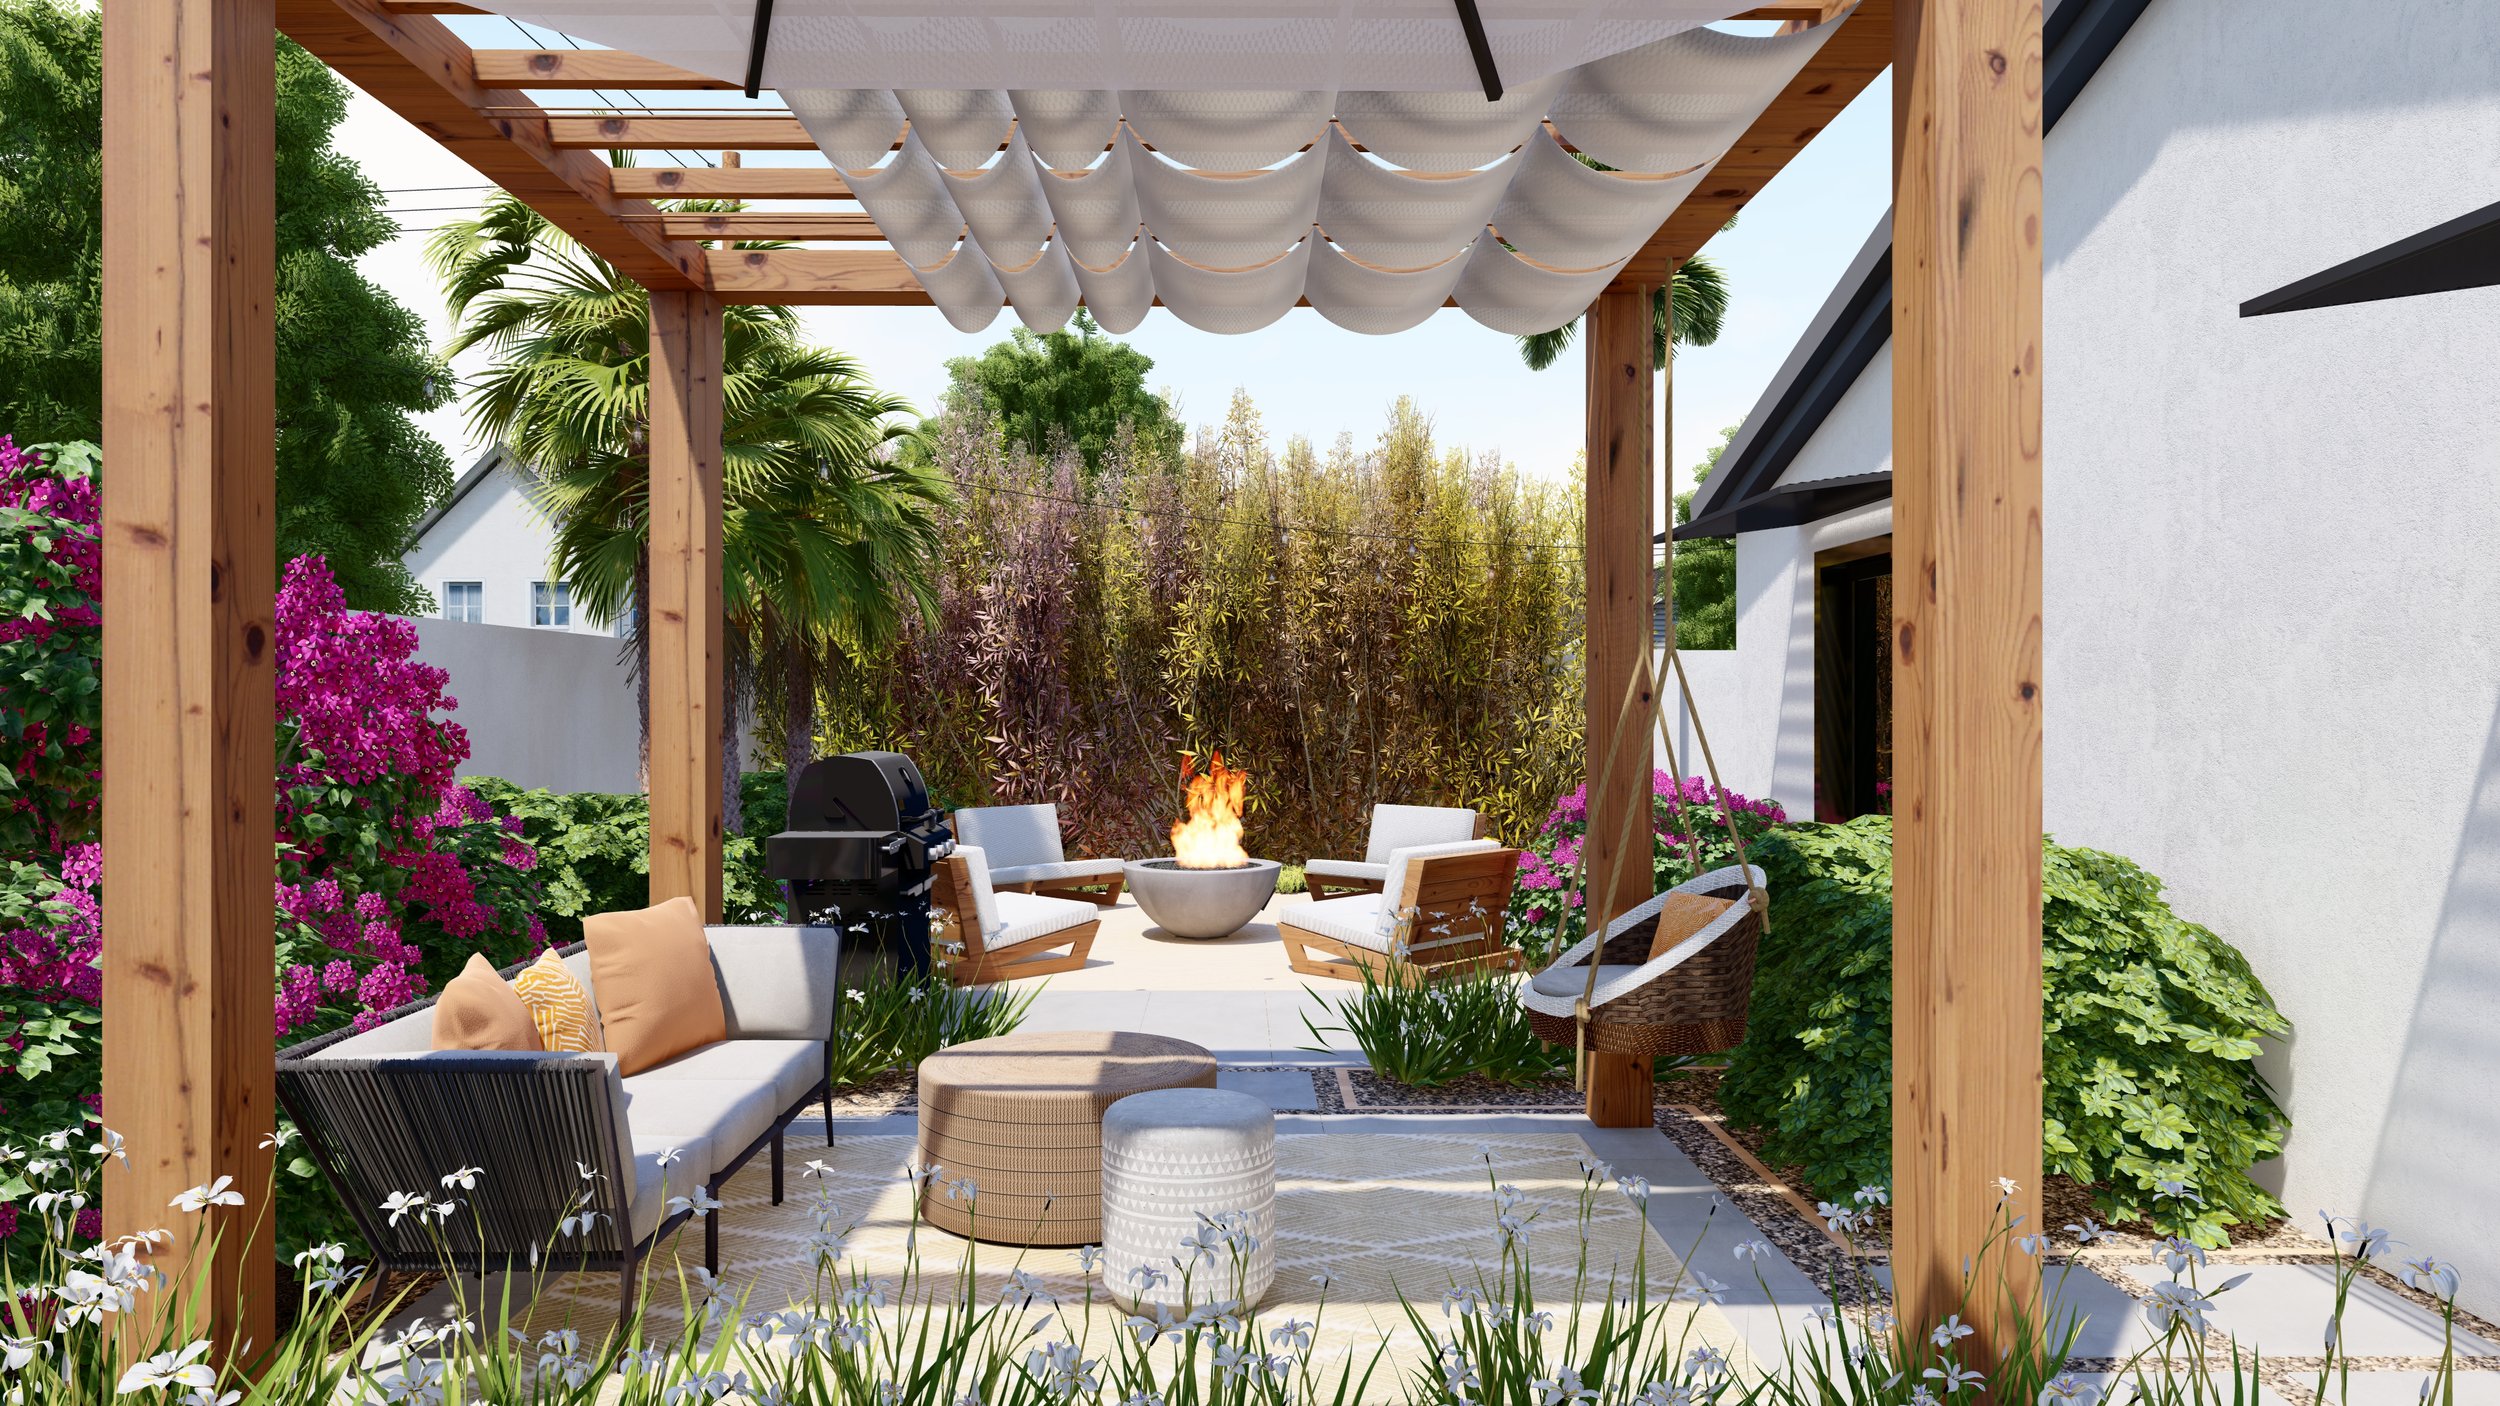 Modern wooden pergola with retractable canopy over a seating area